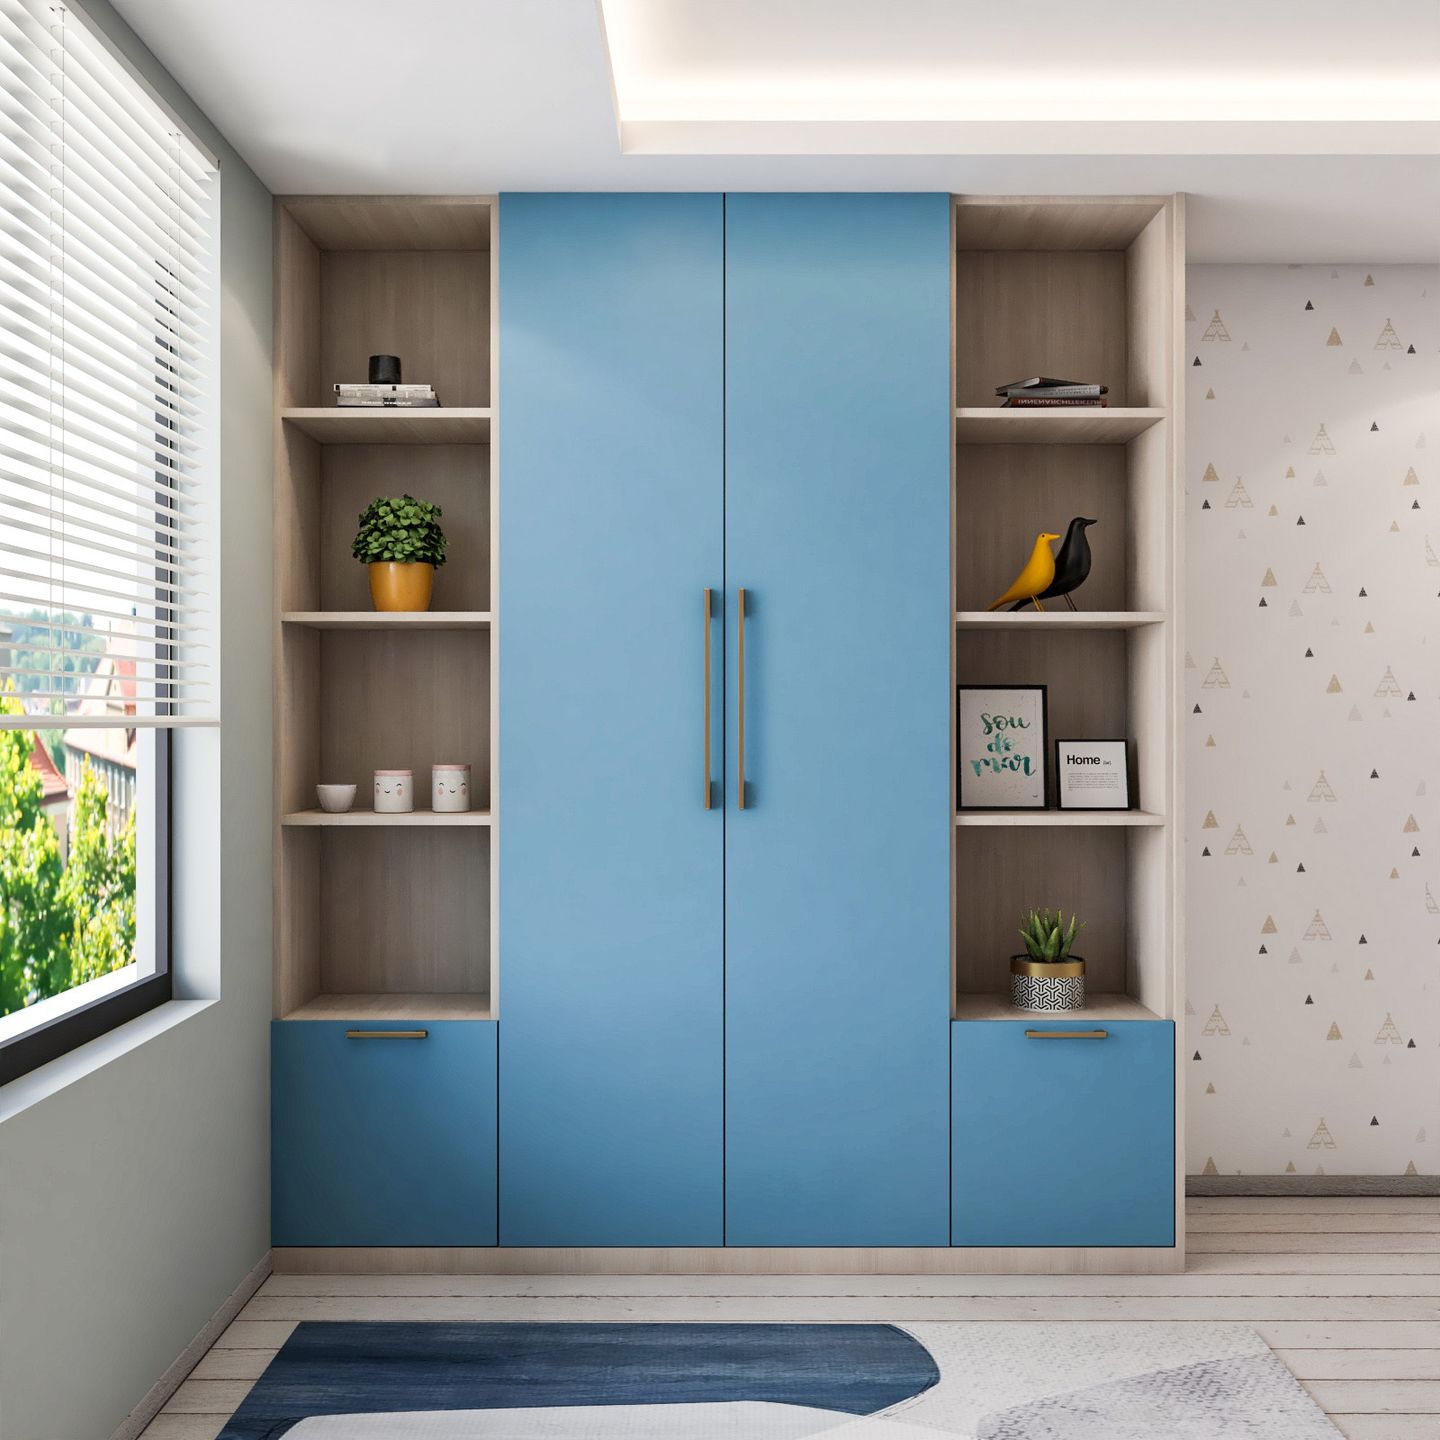 Contemporary 2-Door Blue And White Swing Wardrobe With Open Shelves - Livspace